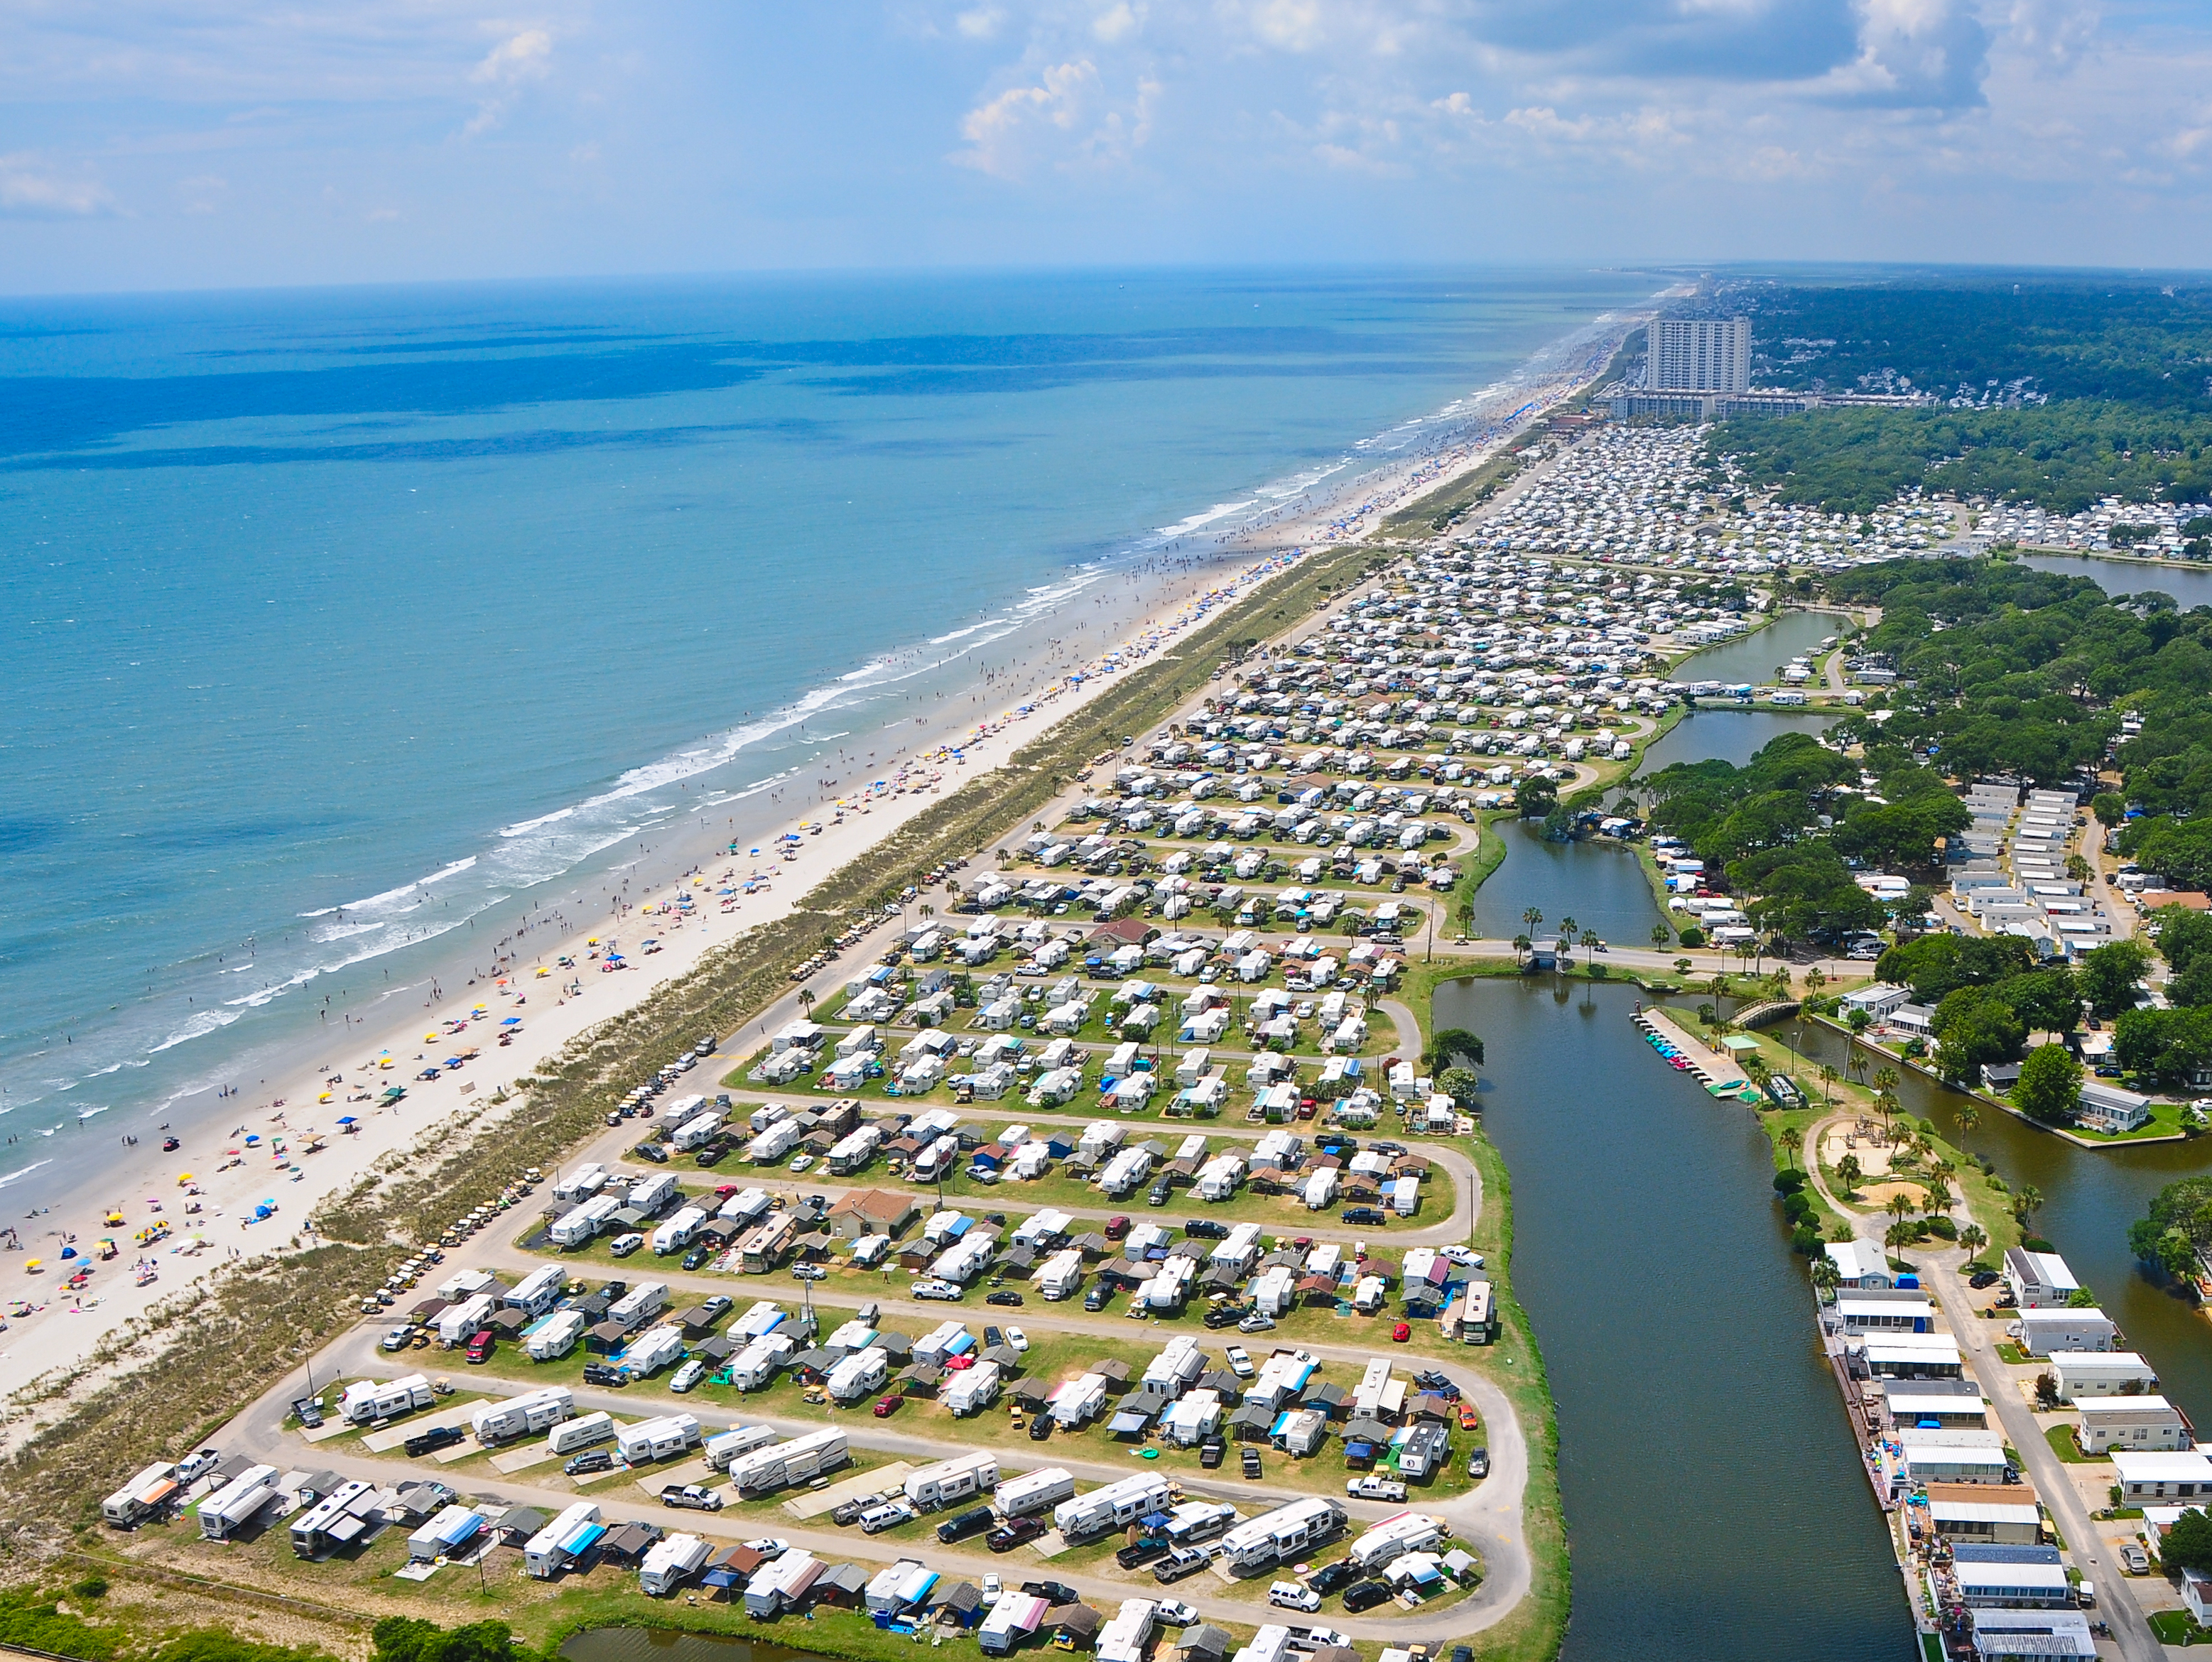 Camping Capital of the World — arial view of RVs parked on coast.